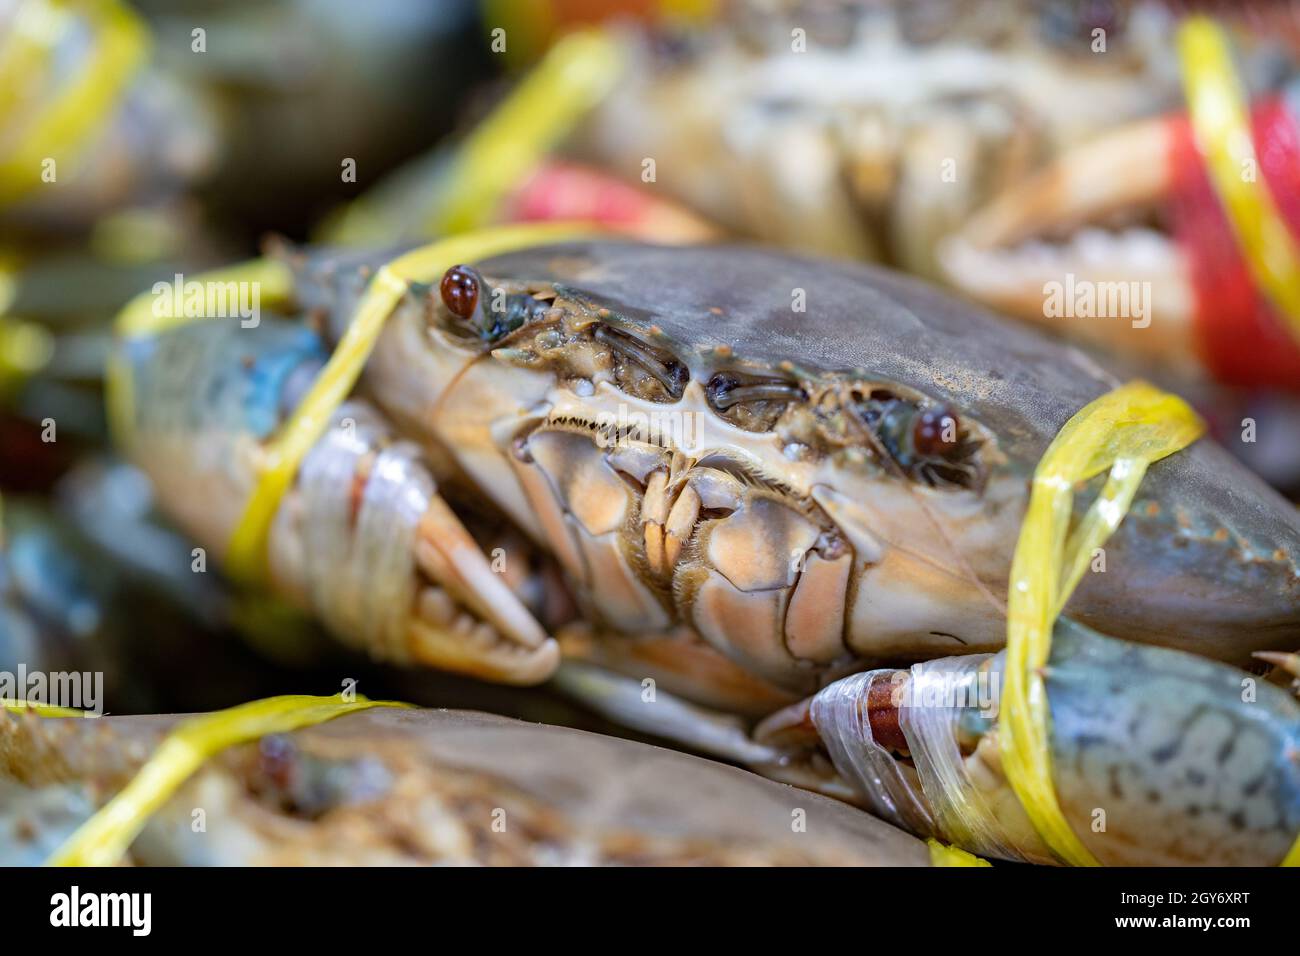 Live Fresh Crab in the fresh Asia market for sale. Stock Photo